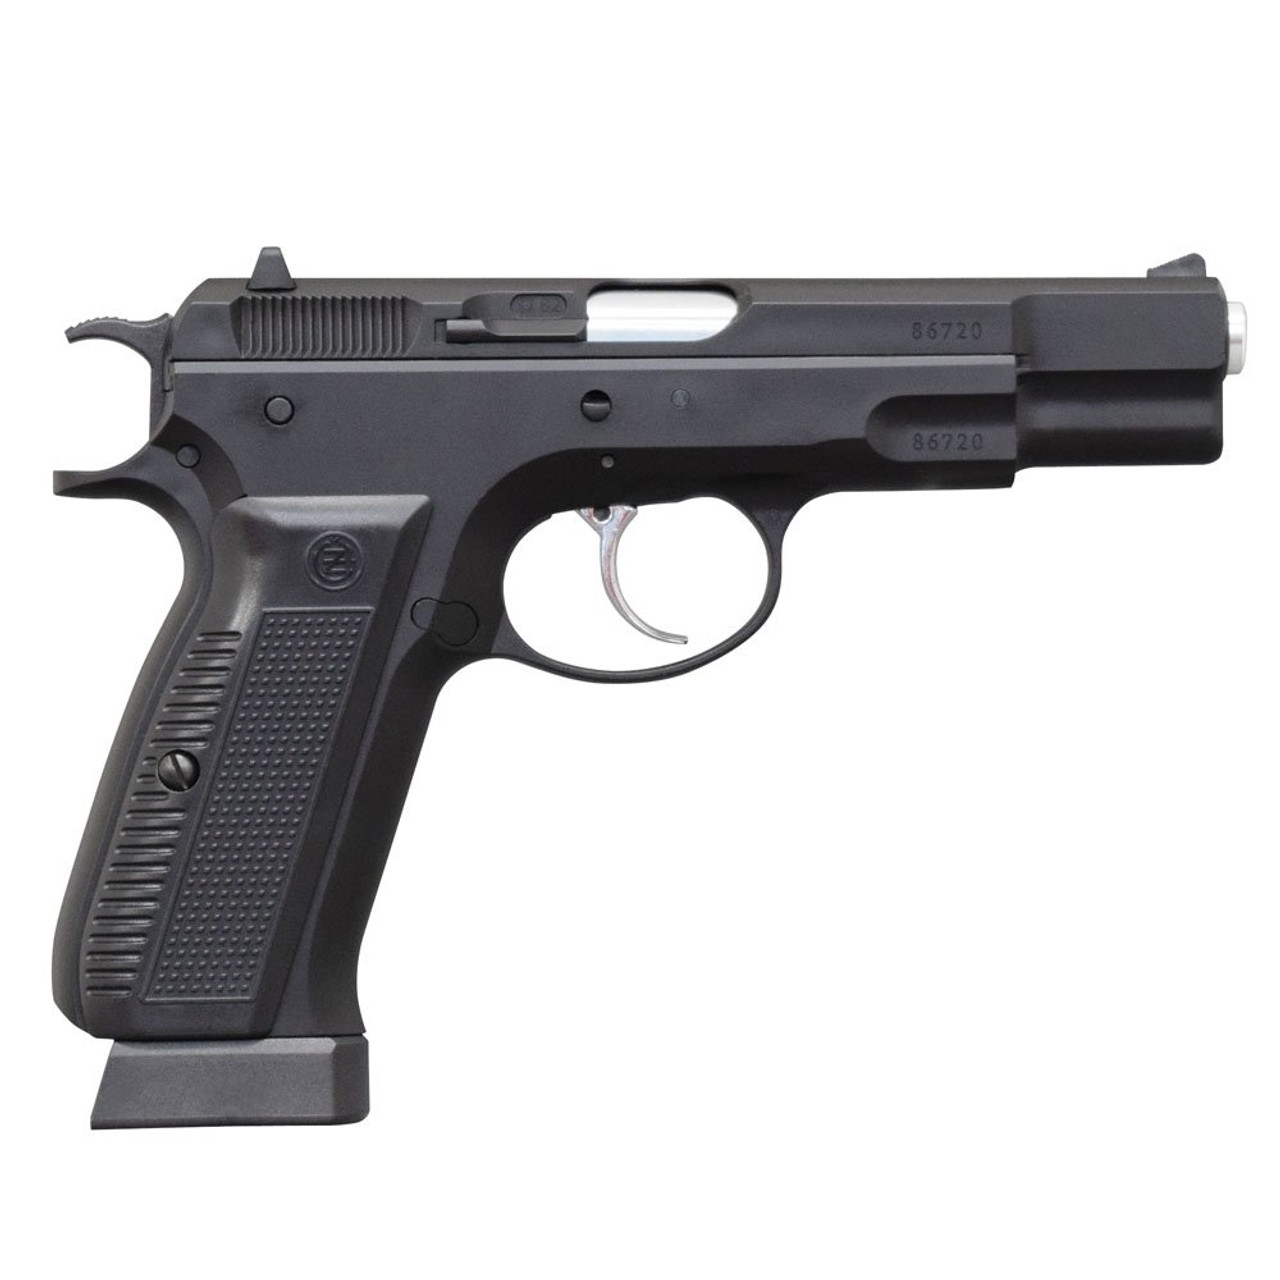 Muzzle right of Carbon 8 Black Cz 75 2nd.ver GBB Airsoft gun 